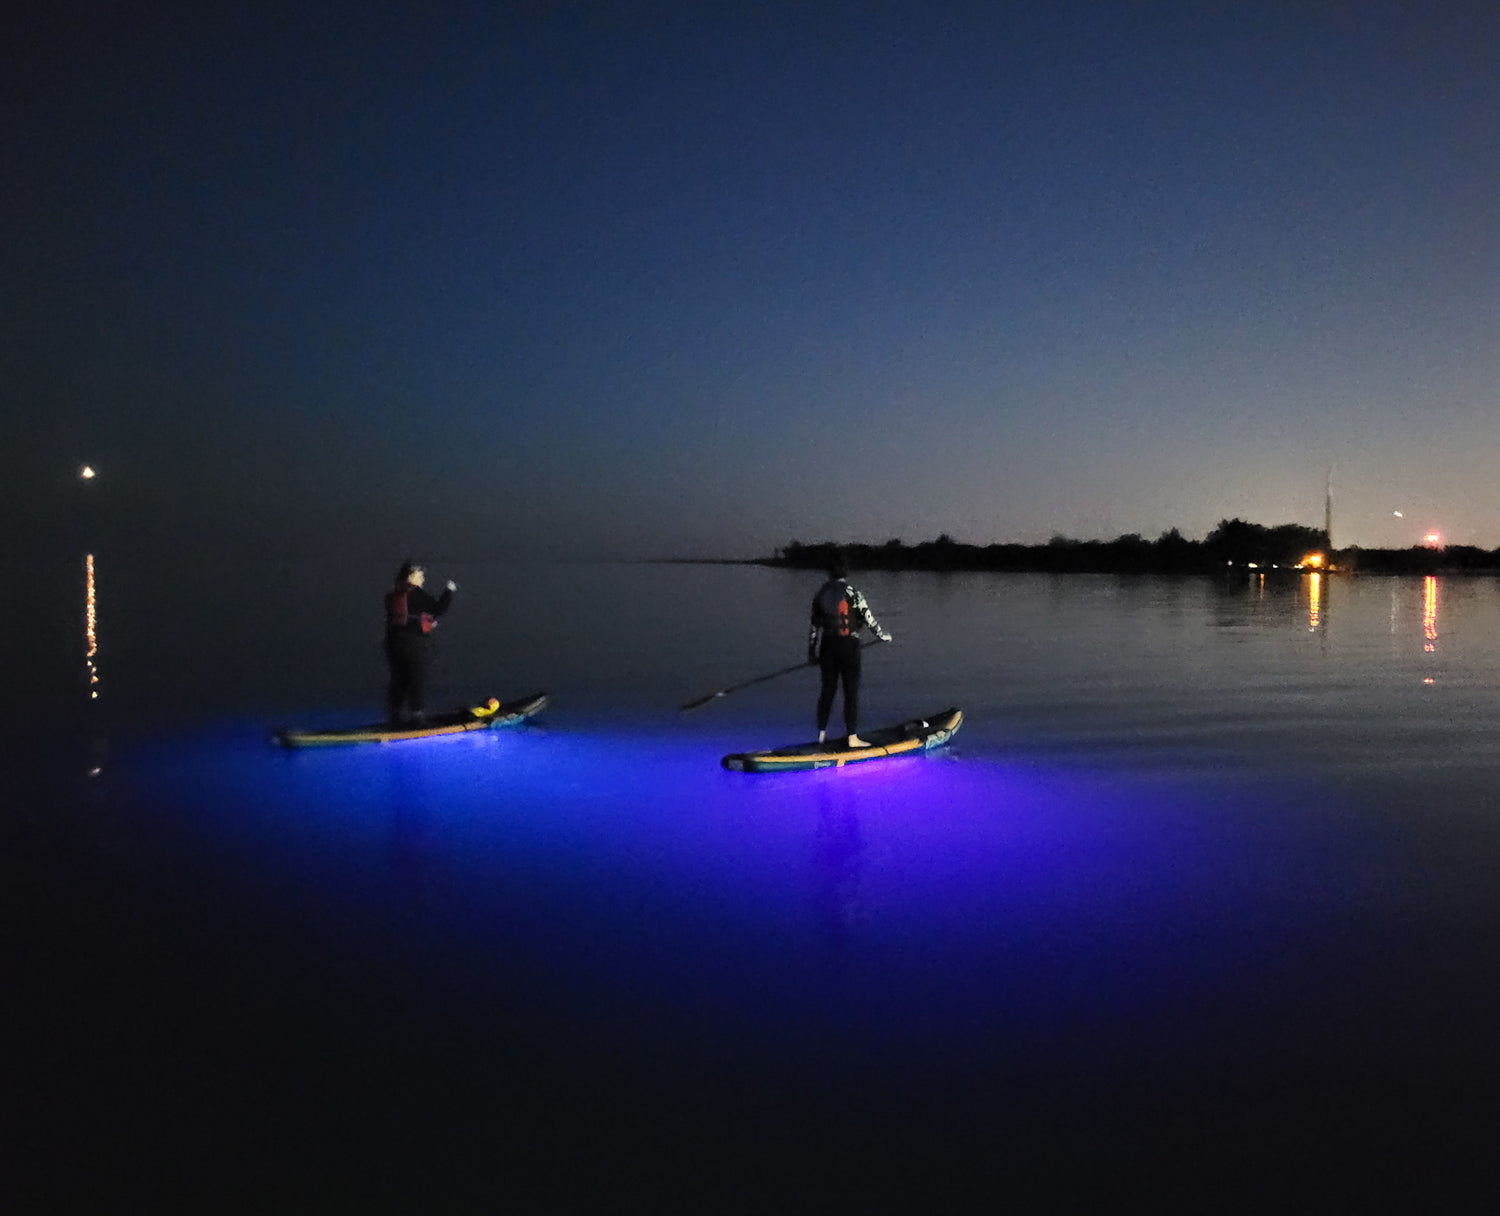 Night SUP safety with Submrg Aurora Explorer. Bright paddle board lights are illuminating the water beneath the paddleboard and creating a beautiful glow. Aurora Explorer is a safety accessory for paddleboards and kayaks.